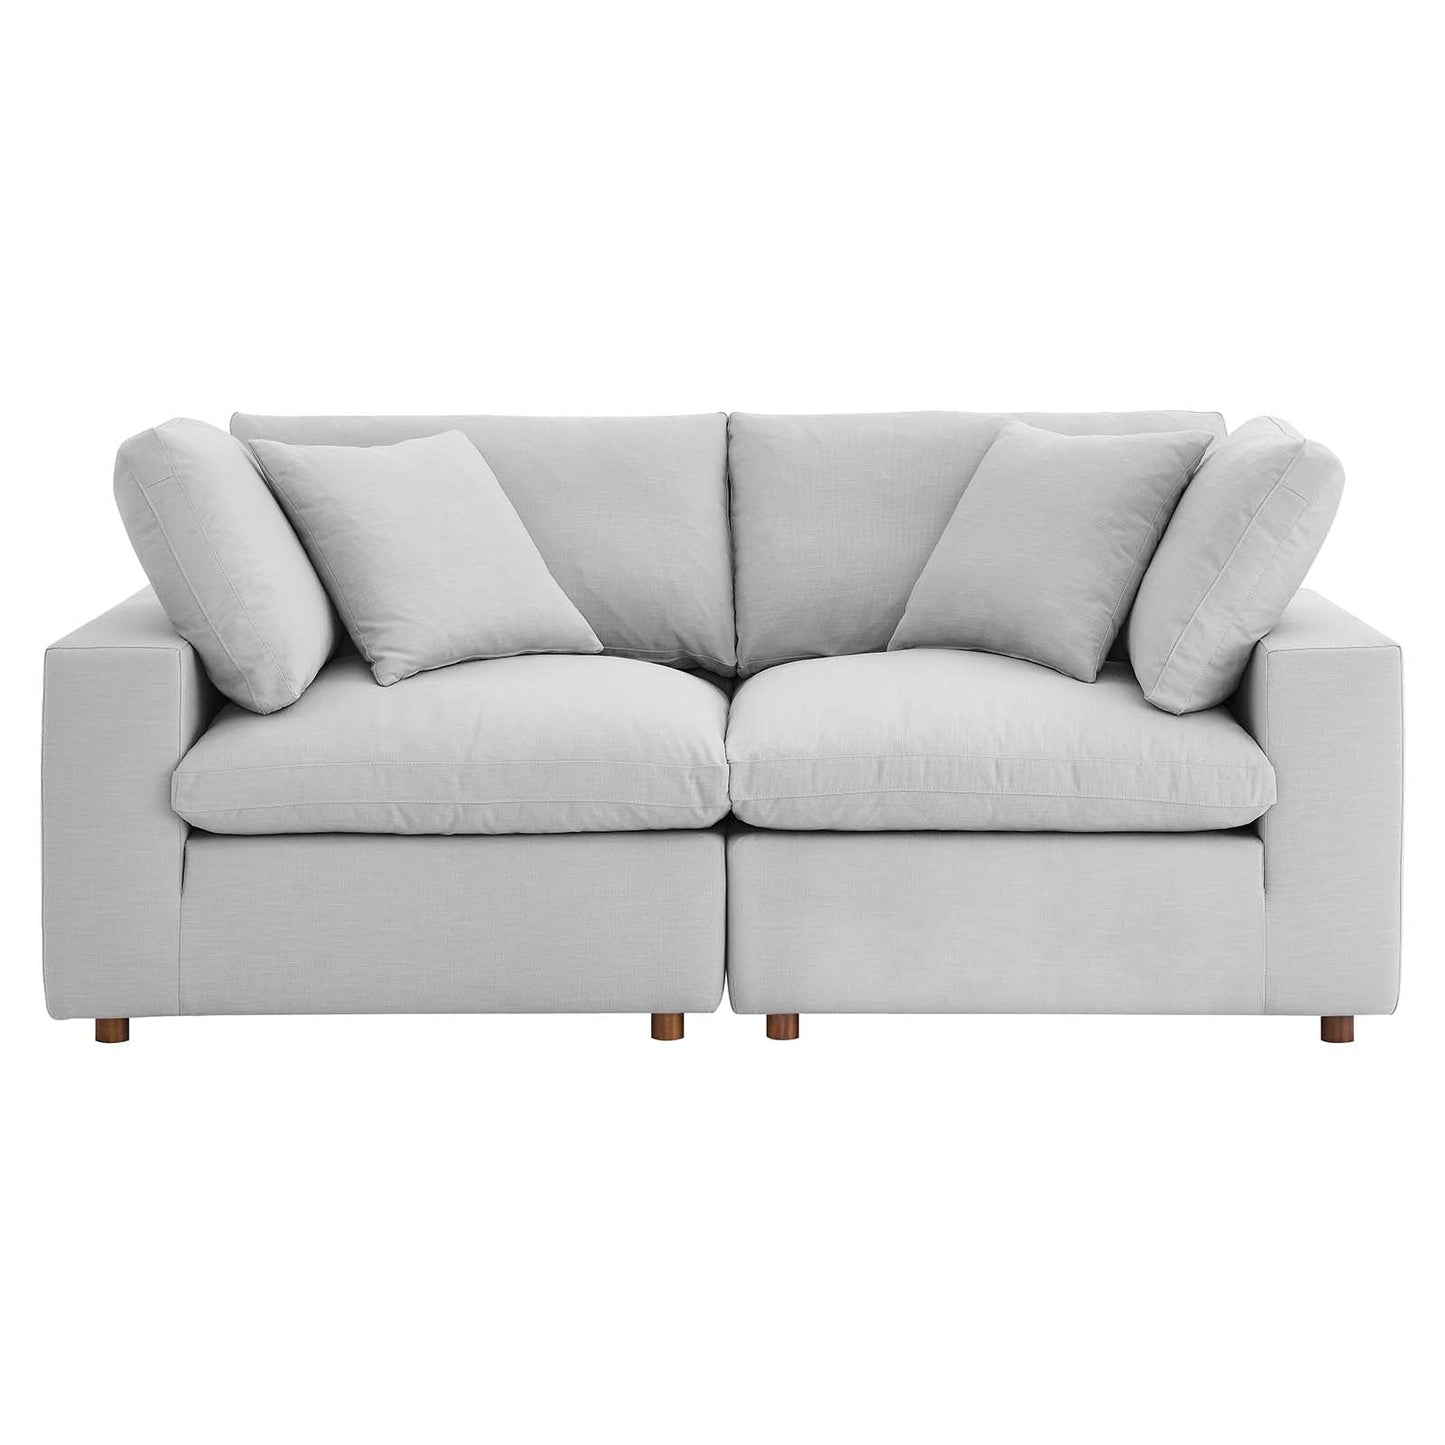 Connie Down Filled Overstuffed 2 Piece Sectional Sofa Set